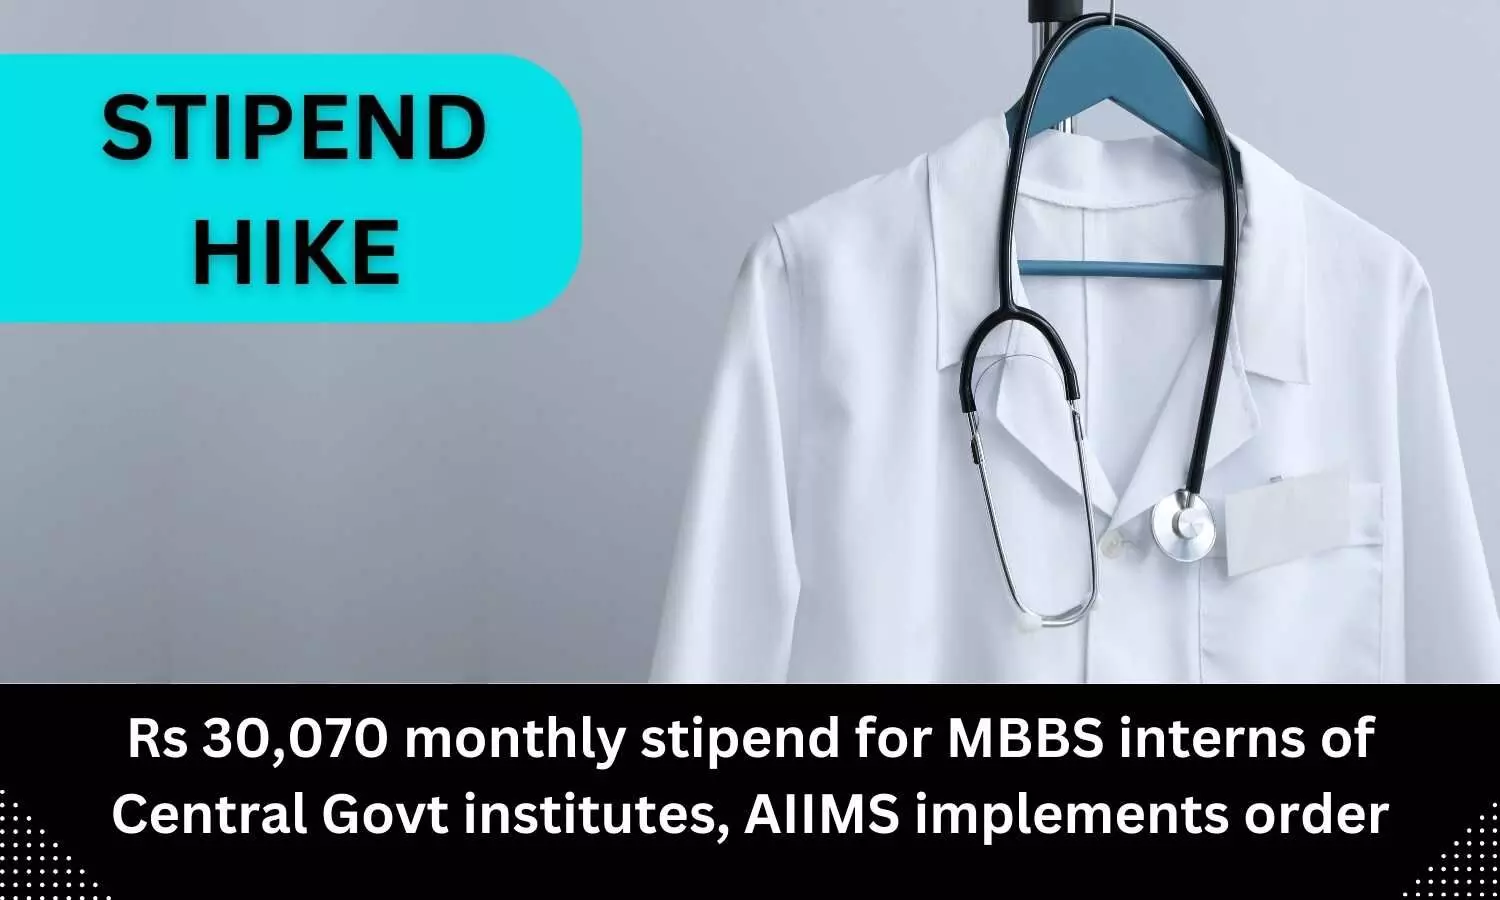 Rs 30,070 monthly stipend for MBBS interns of Central Govt institutes, AIIMS implements order